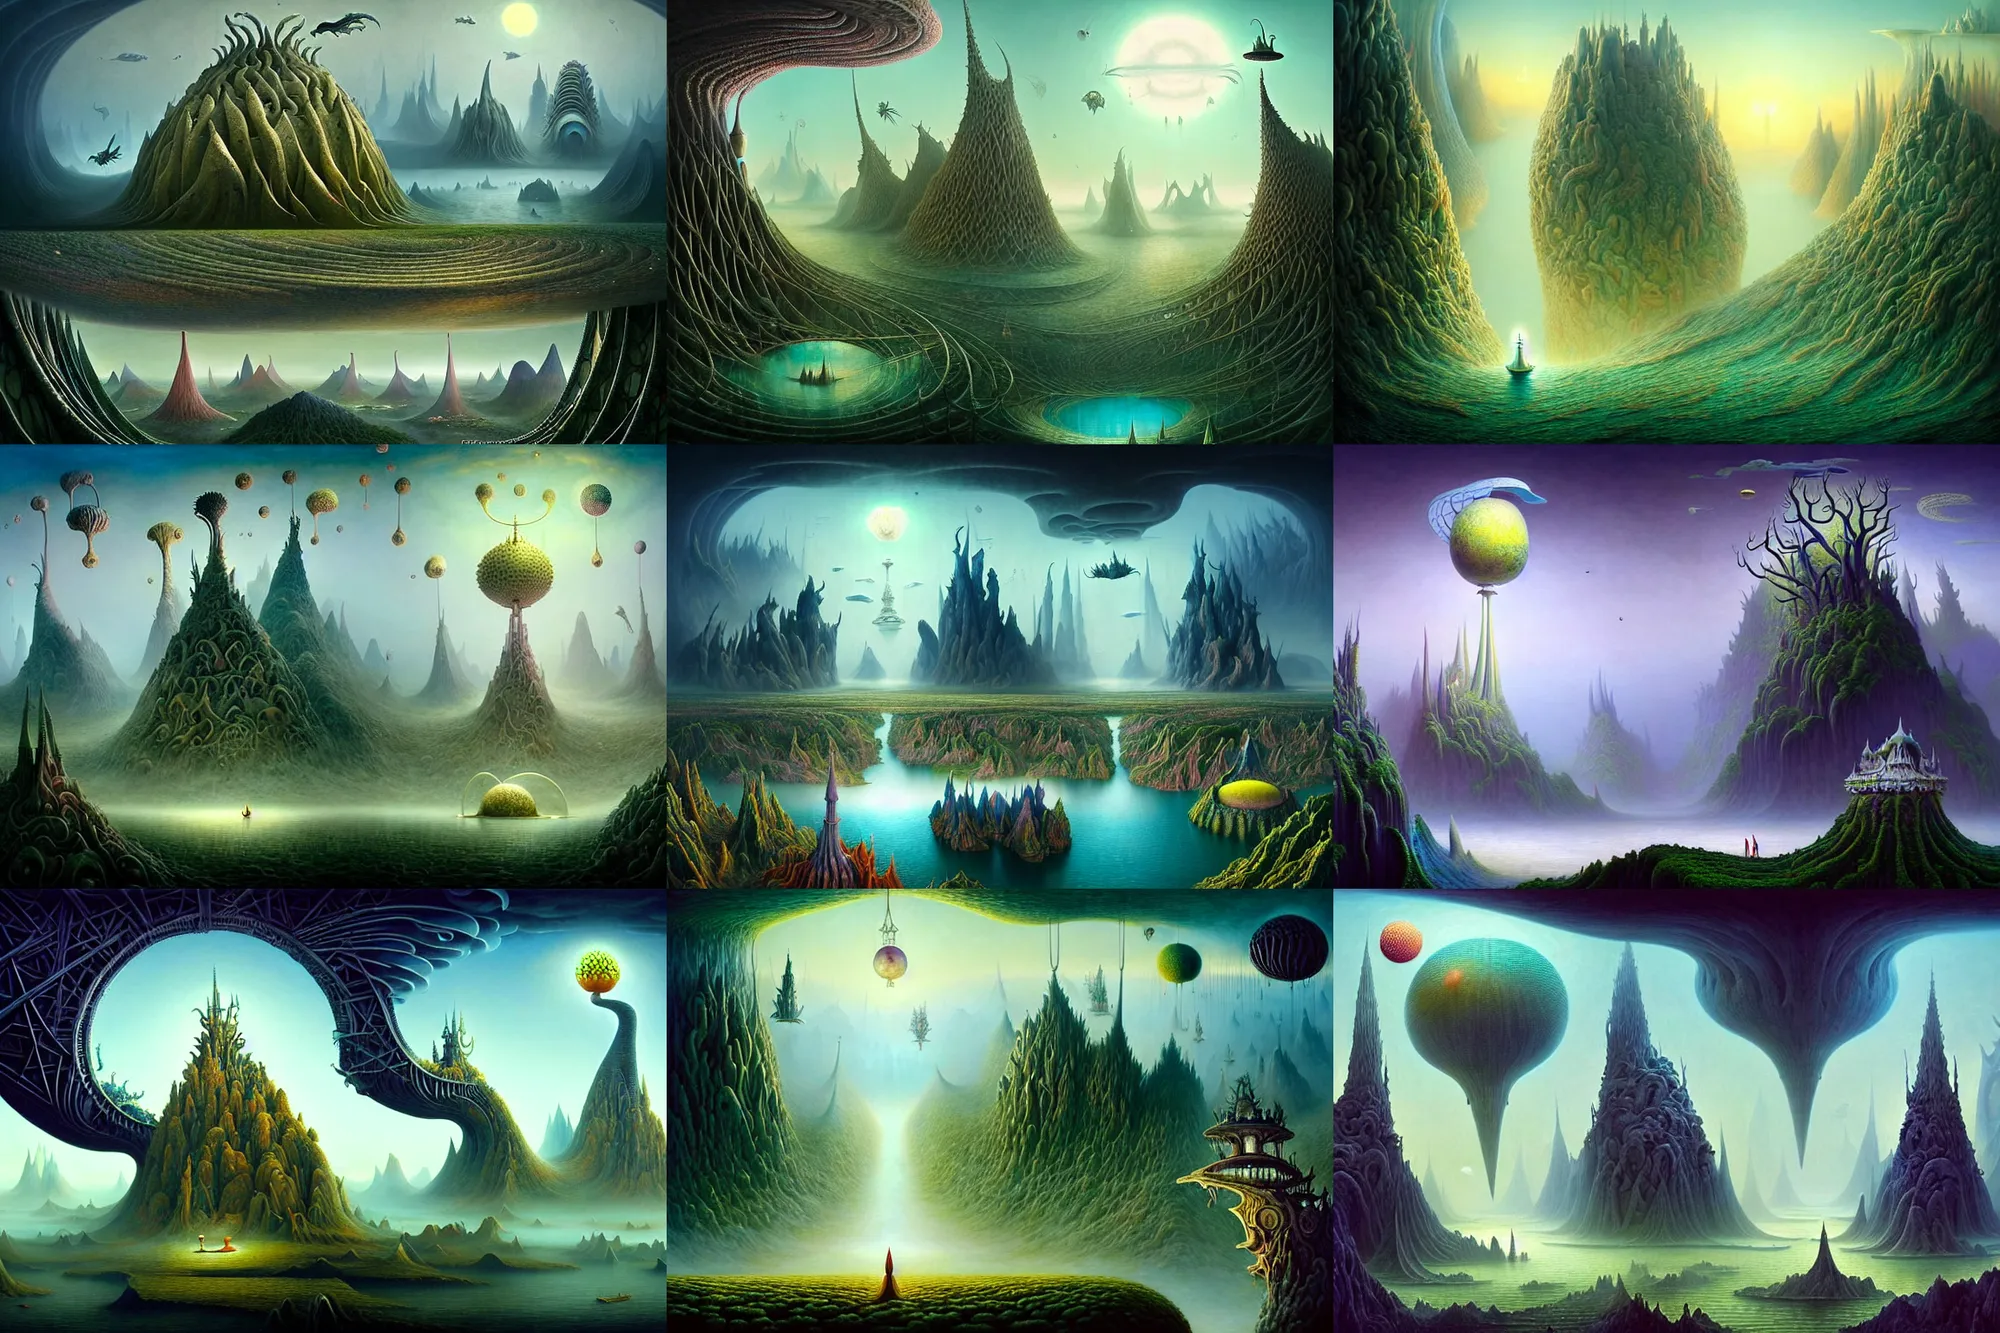 Prompt: a beguiling epic stunning beautiful and insanely detailed matte painting of alien dream worlds with surreal architecture designed by Heironymous Bosch, mega structures inspired by Heironymous Bosch's Garden of Earthly Delights, vast surreal landscape and horizon by Andrew Ferez and Cyril Rolando and Fenghua Zhong, masterpiece!!, grand!, imaginative!!!, whimsical!!, epic scale, intricate details, sense of awe, elite, wonder, insanely complex, masterful composition, sharp focus, fantasy realism, dramatic lighting